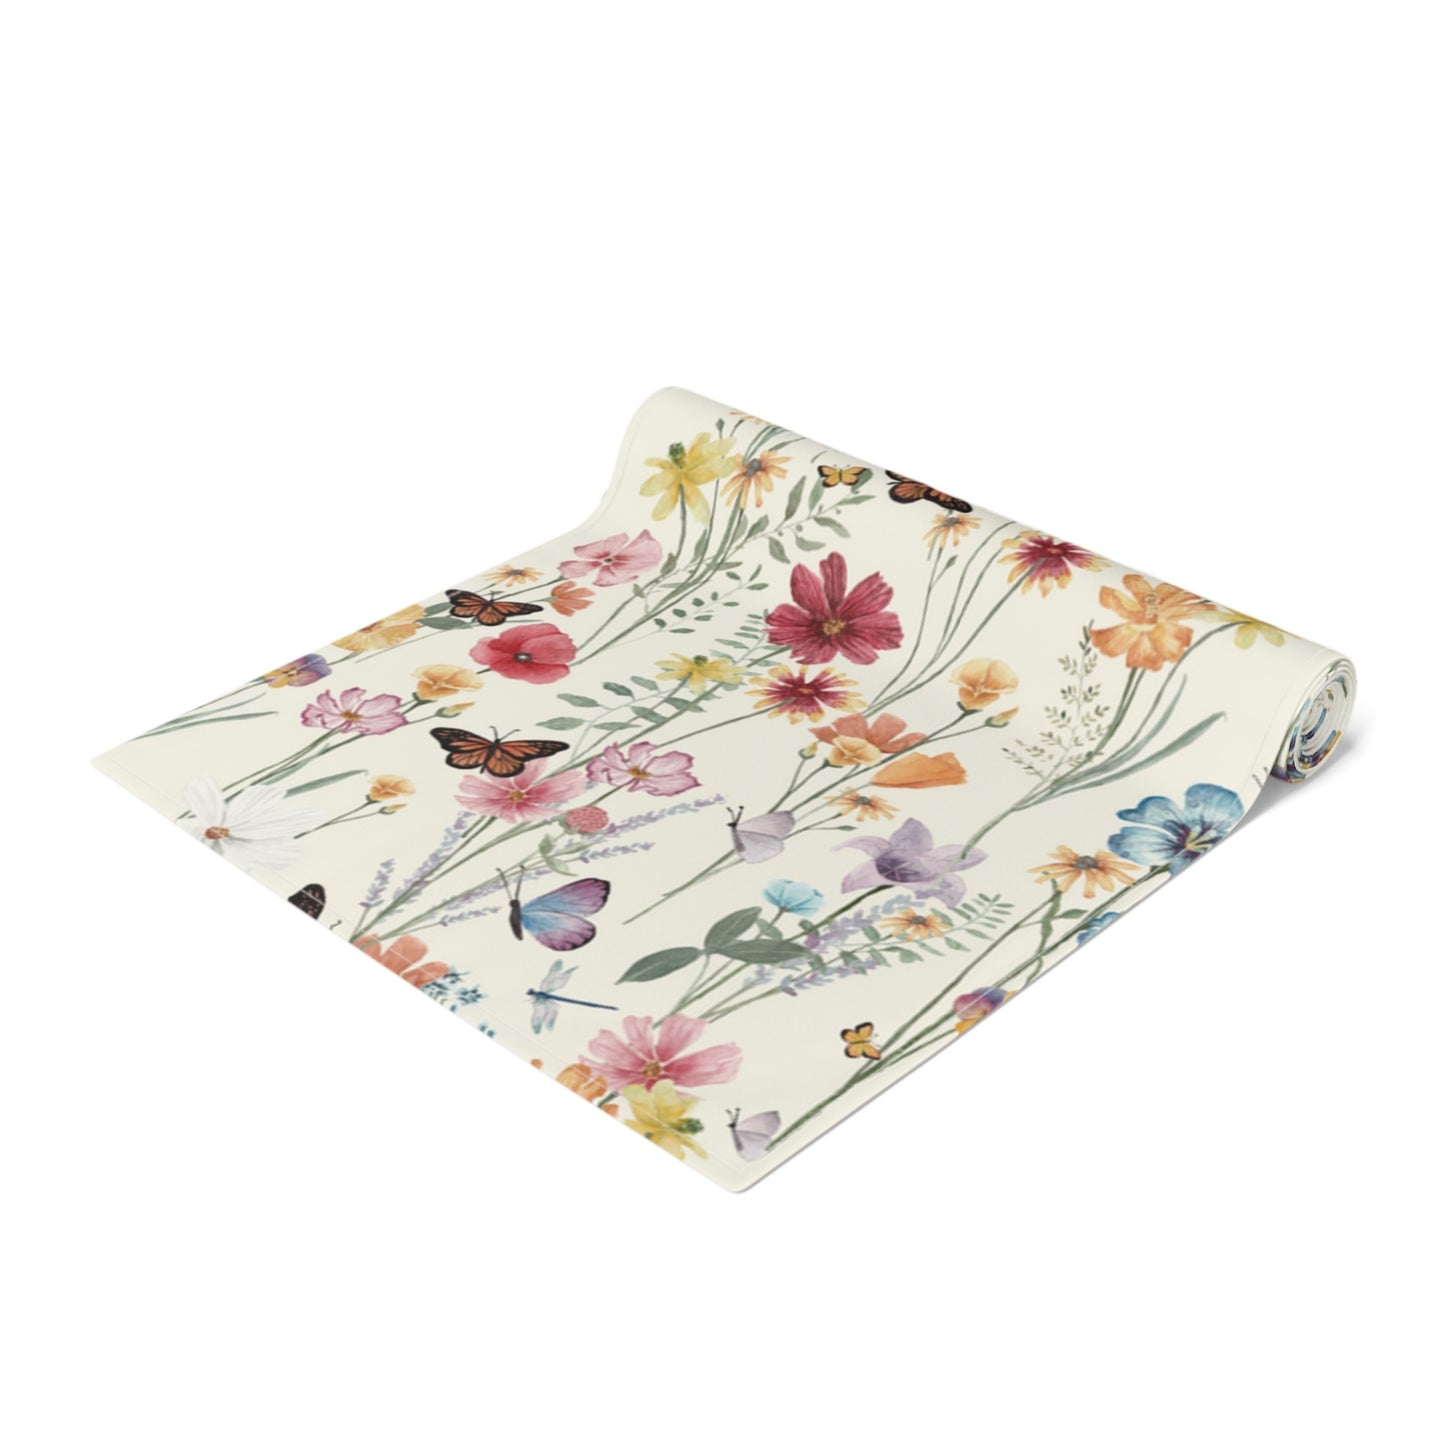 a table runner designed with botanical style and flowers 